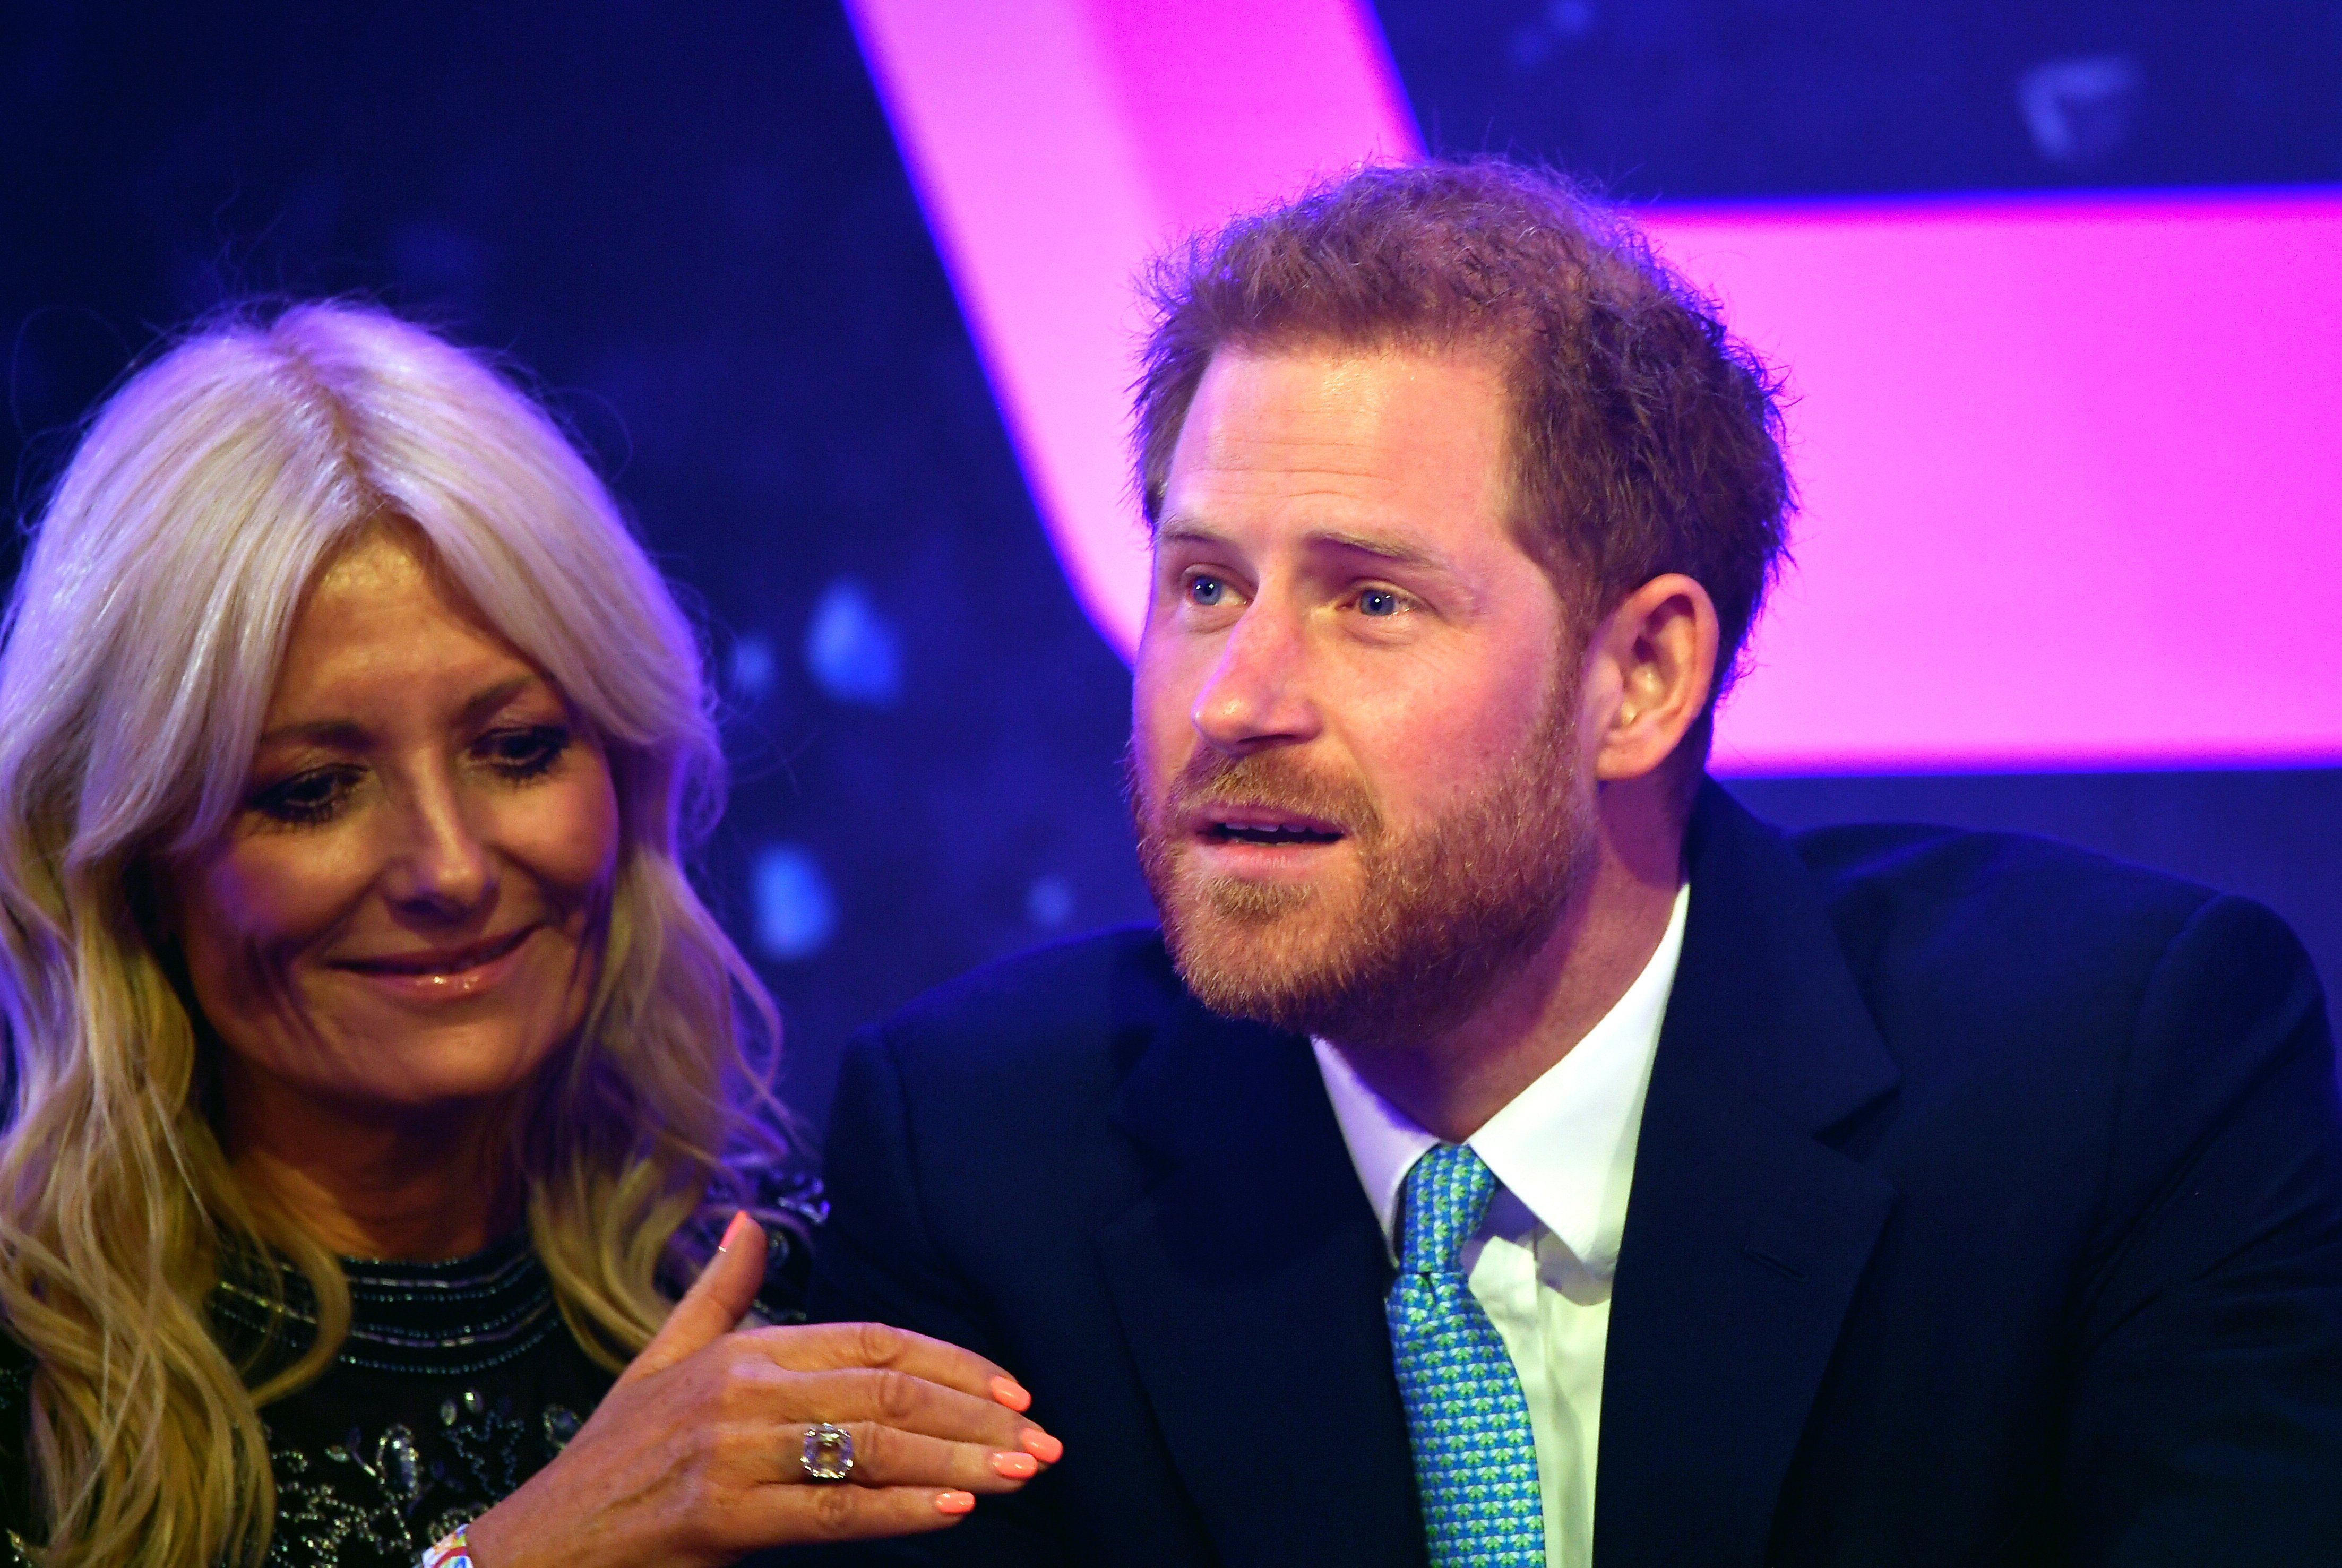 Prince Harry, Duke of Sussex reacts next to television presenter Gaby Roslin as he delivers a speech during the WellChild awards at Royal Lancaster Hotel on October 15, 2019 in London, England | Photo: Getty Images